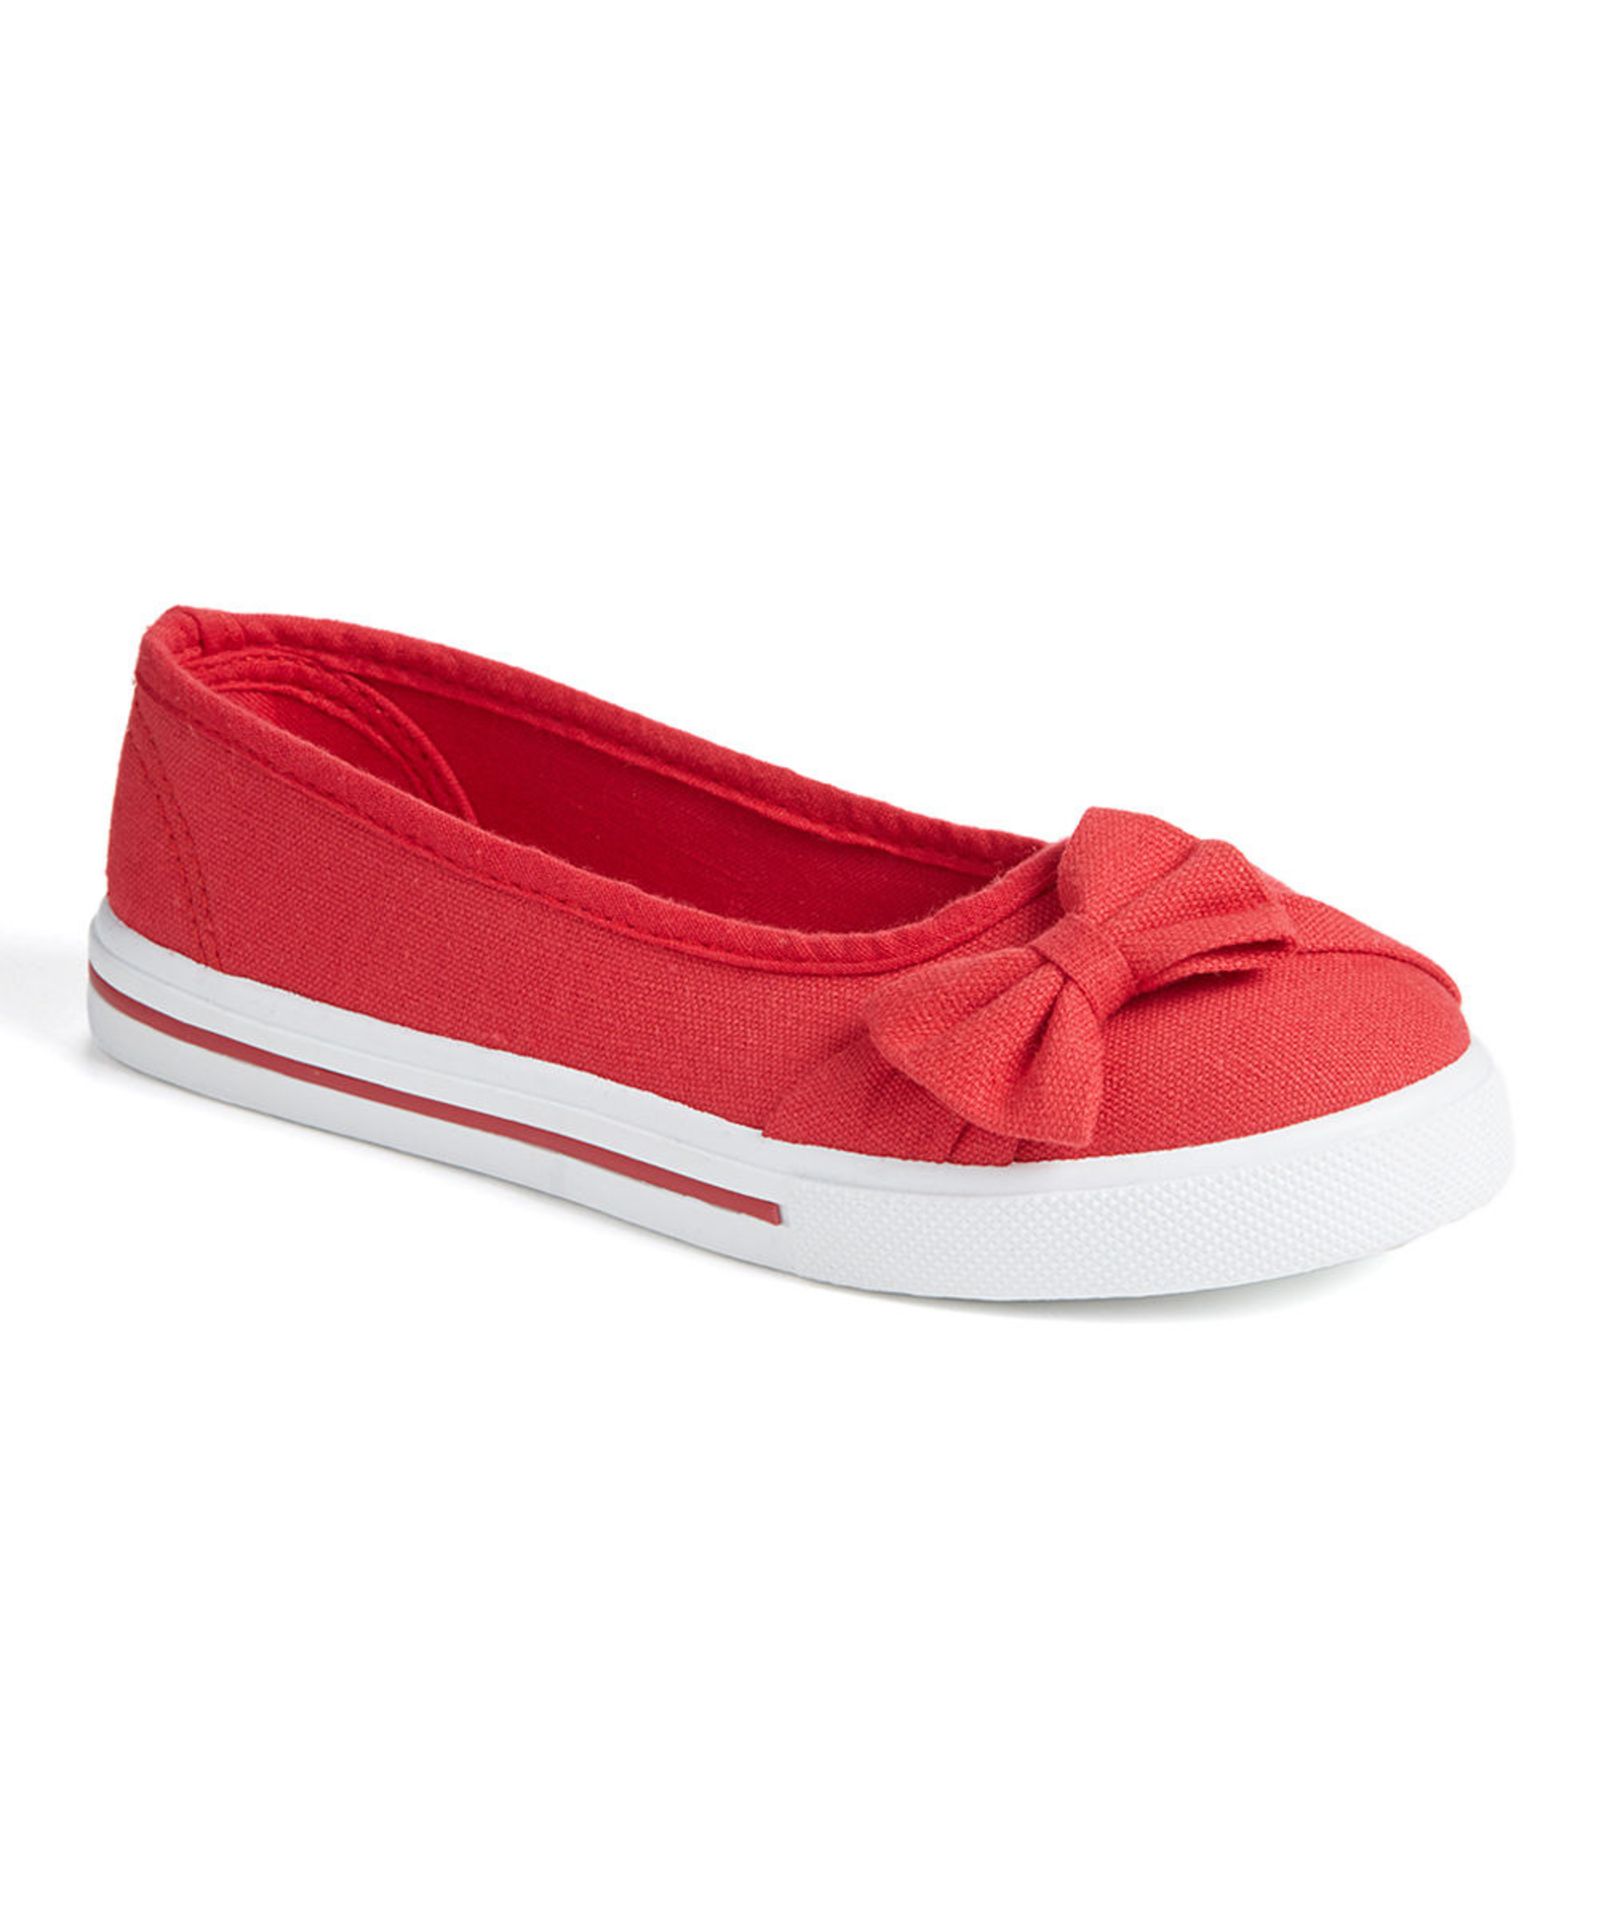 Ositos Shoes Red Asymmetrical Bow Slip-On Sneaker (Uk Size 12: Us Size 13) (New with box) [Ref: